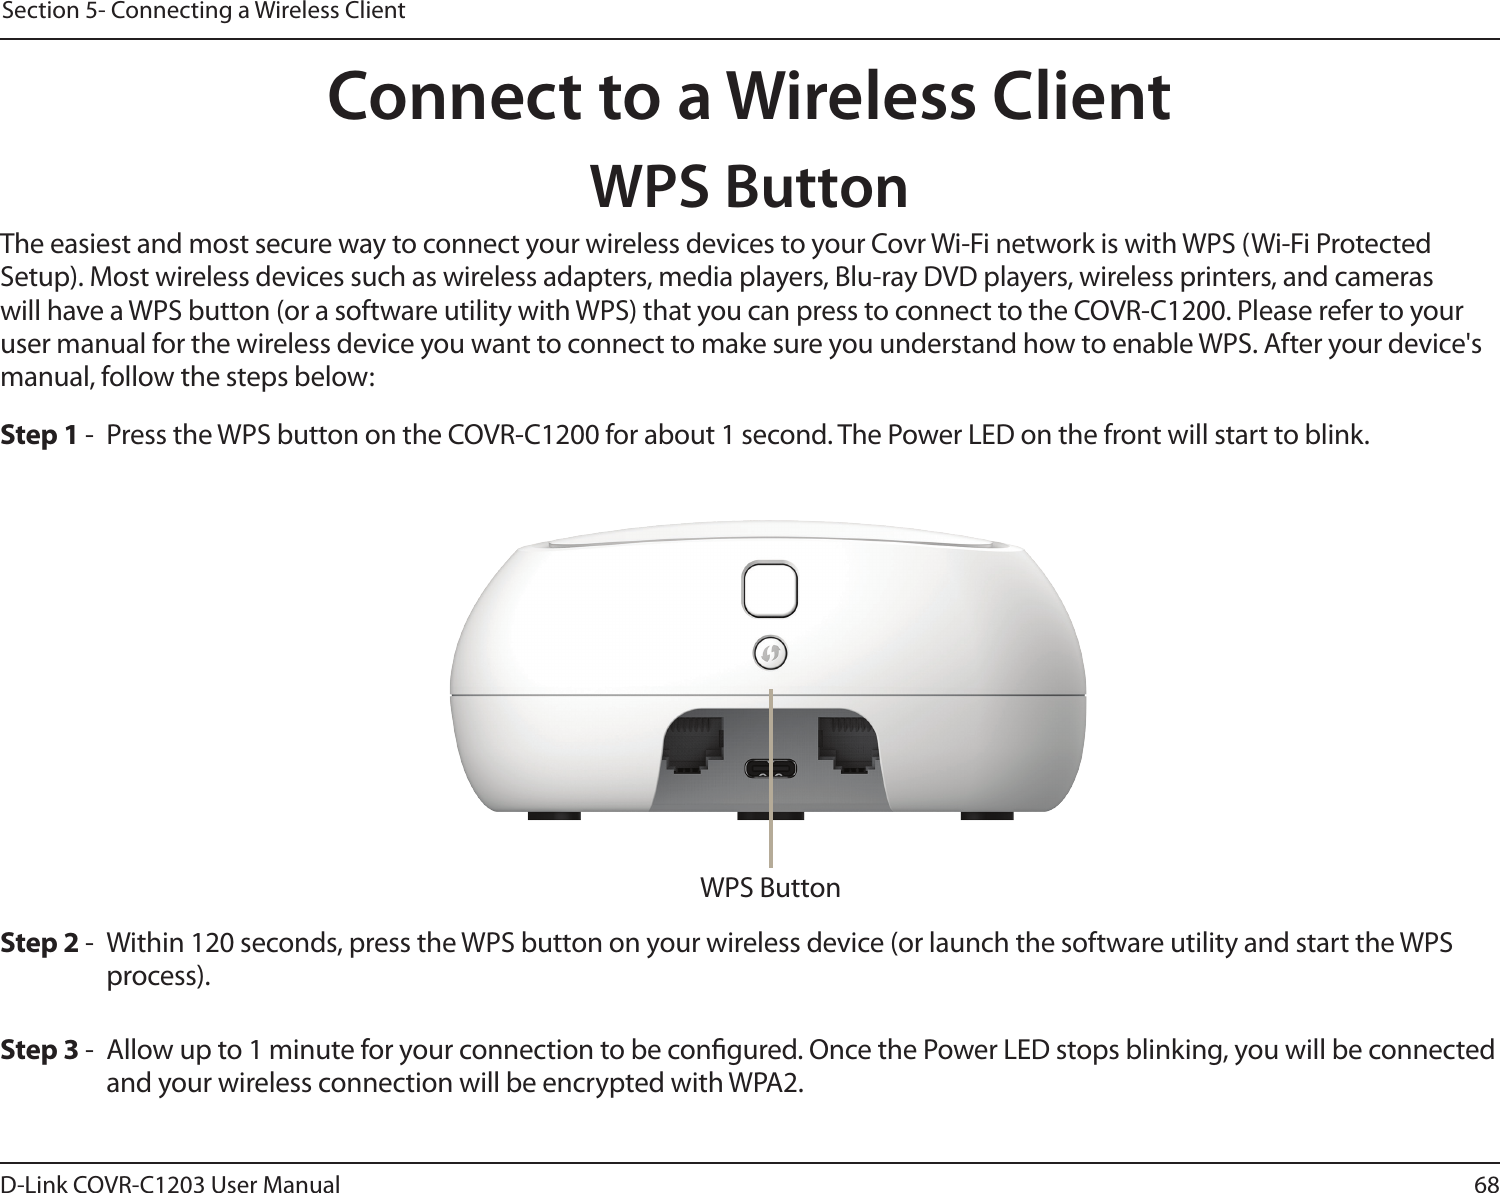 68D-Link COVR-C1203 User ManualSection 5- Connecting a Wireless ClientConnect to a Wireless ClientWPS ButtonStep 2 -  Within 120 seconds, press the WPS button on your wireless device (or launch the software utility and start the WPS process).The easiest and most secure way to connect your wireless devices to your Covr Wi-Fi network is with WPS (Wi-Fi Protected Setup). Most wireless devices such as wireless adapters, media players, Blu-ray DVD players, wireless printers, and cameras will have a WPS button (or a software utility with WPS) that you can press to connect to the COVR-C1200. Please refer to your user manual for the wireless device you want to connect to make sure you understand how to enable WPS. After your device&apos;s manual, follow the steps below:Step 1 -  Press the WPS button on the COVR-C1200 for about 1 second. The Power LED on the front will start to blink.Step 3 -  Allow up to 1 minute for your connection to be congured. Once the Power LED stops blinking, you will be connected and your wireless connection will be encrypted with WPA2.WPS Button